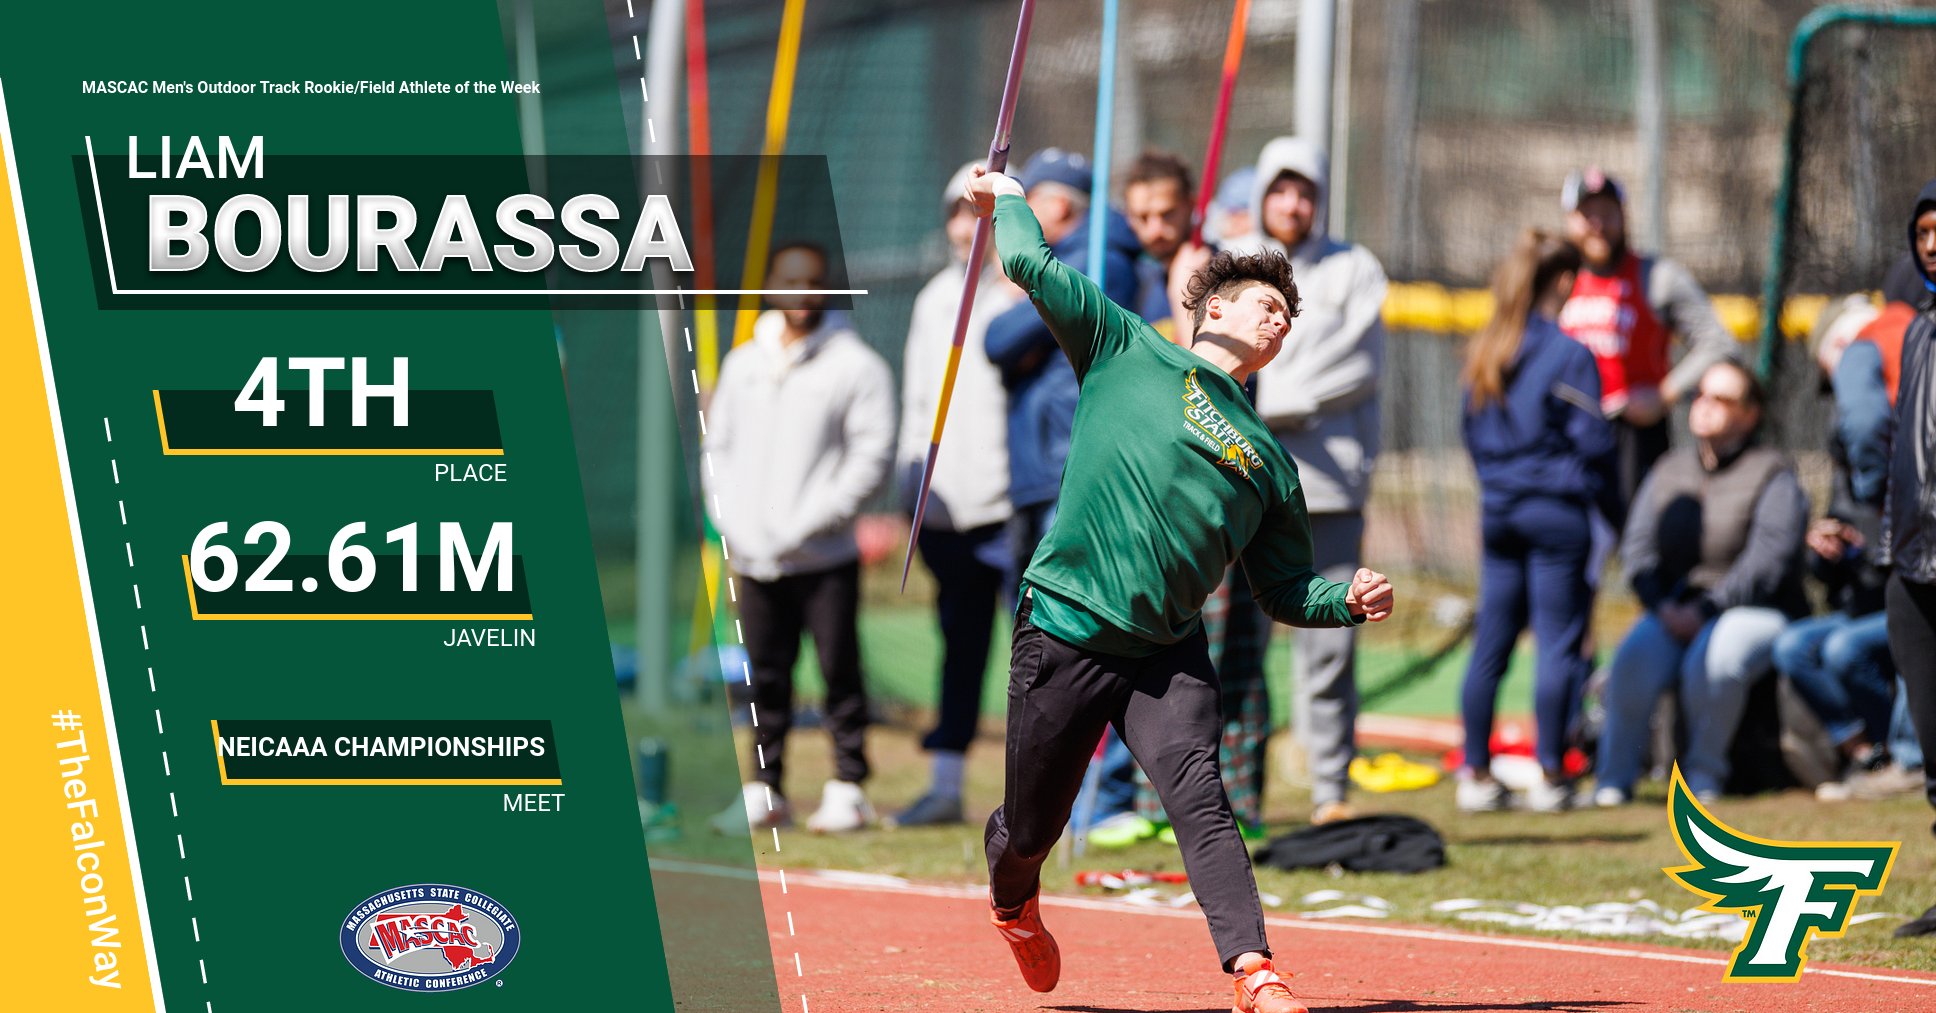 Bourassa Collects MASCAC MOTK Rookie And Field Athlete Of The Week Honors